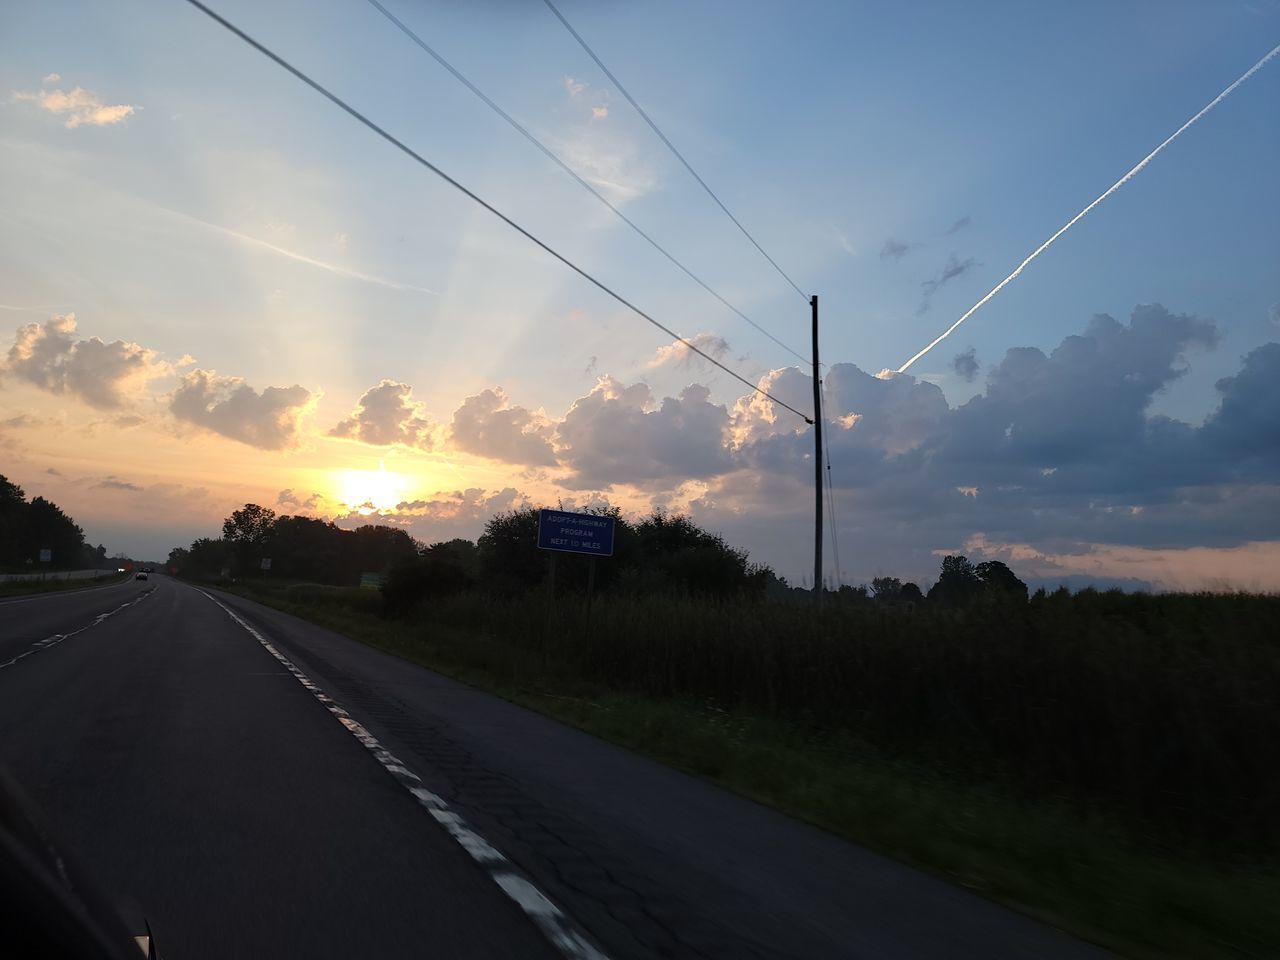 sky, road, cloud, transportation, sunset, electricity, nature, cable, landscape, technology, environment, horizon, electricity pylon, power line, no people, scenics - nature, beauty in nature, dusk, plant, evening, highway, power supply, land, outdoors, tree, rural scene, street, tranquility, sun, power generation, mode of transportation, vanishing point, travel, the way forward, city, diminishing perspective, infrastructure, tranquil scene, sunlight, dramatic sky, sign, field, car, silhouette